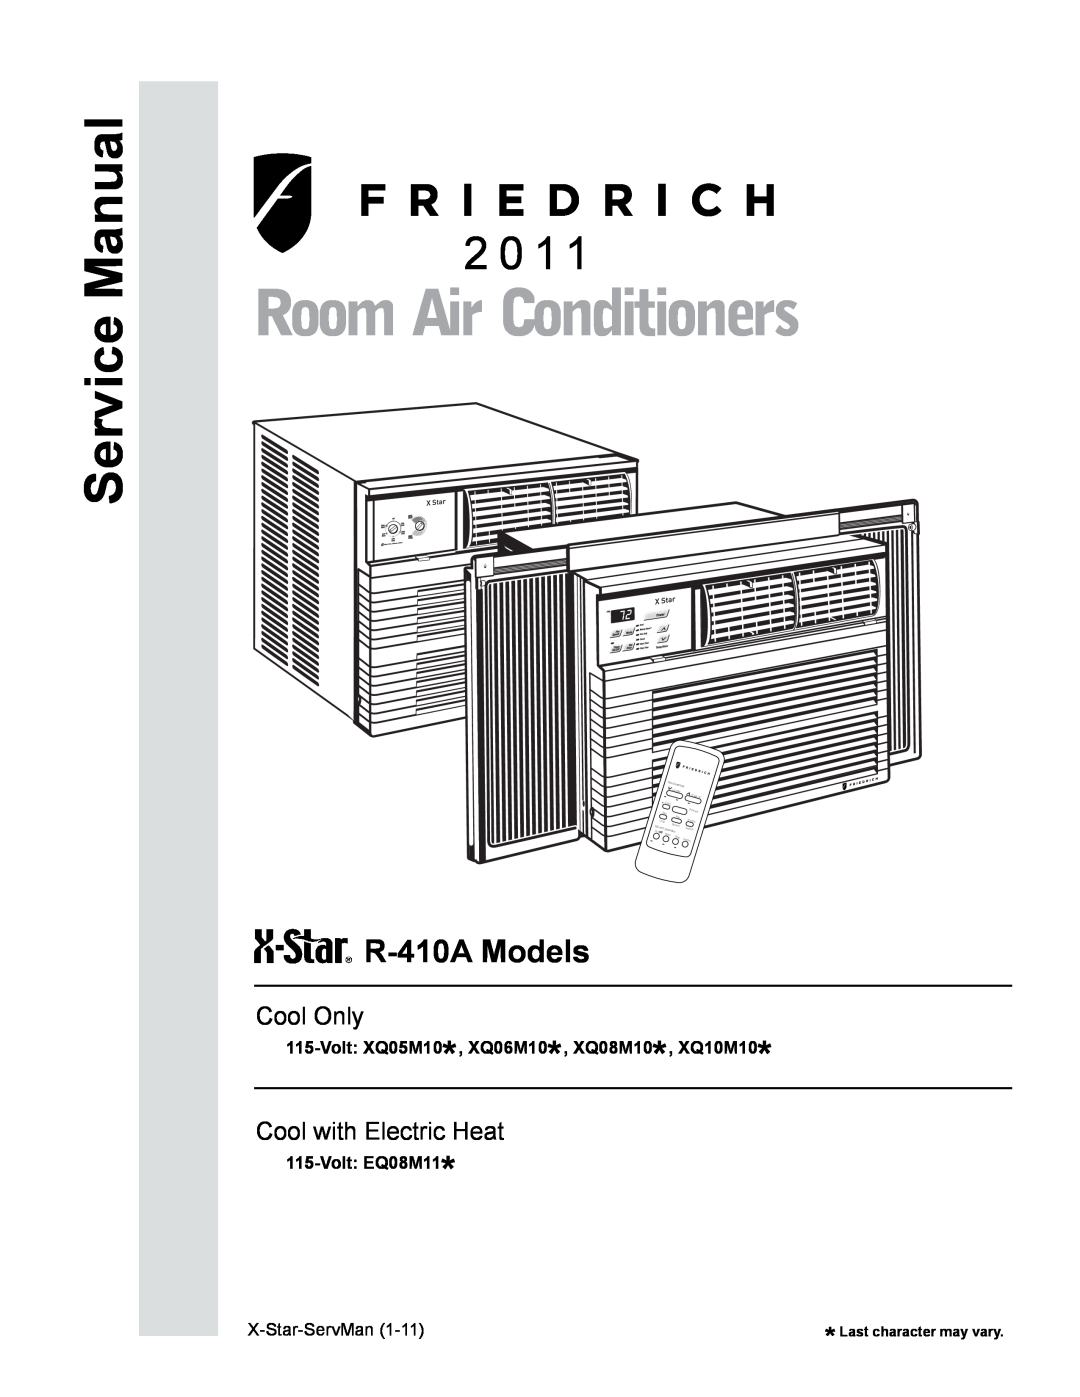 Friedrich XQ06M10 service manual R-410AModels, Room Air Conditioners, Cool Only, Cool with Electric Heat, Volt EQ08M11 